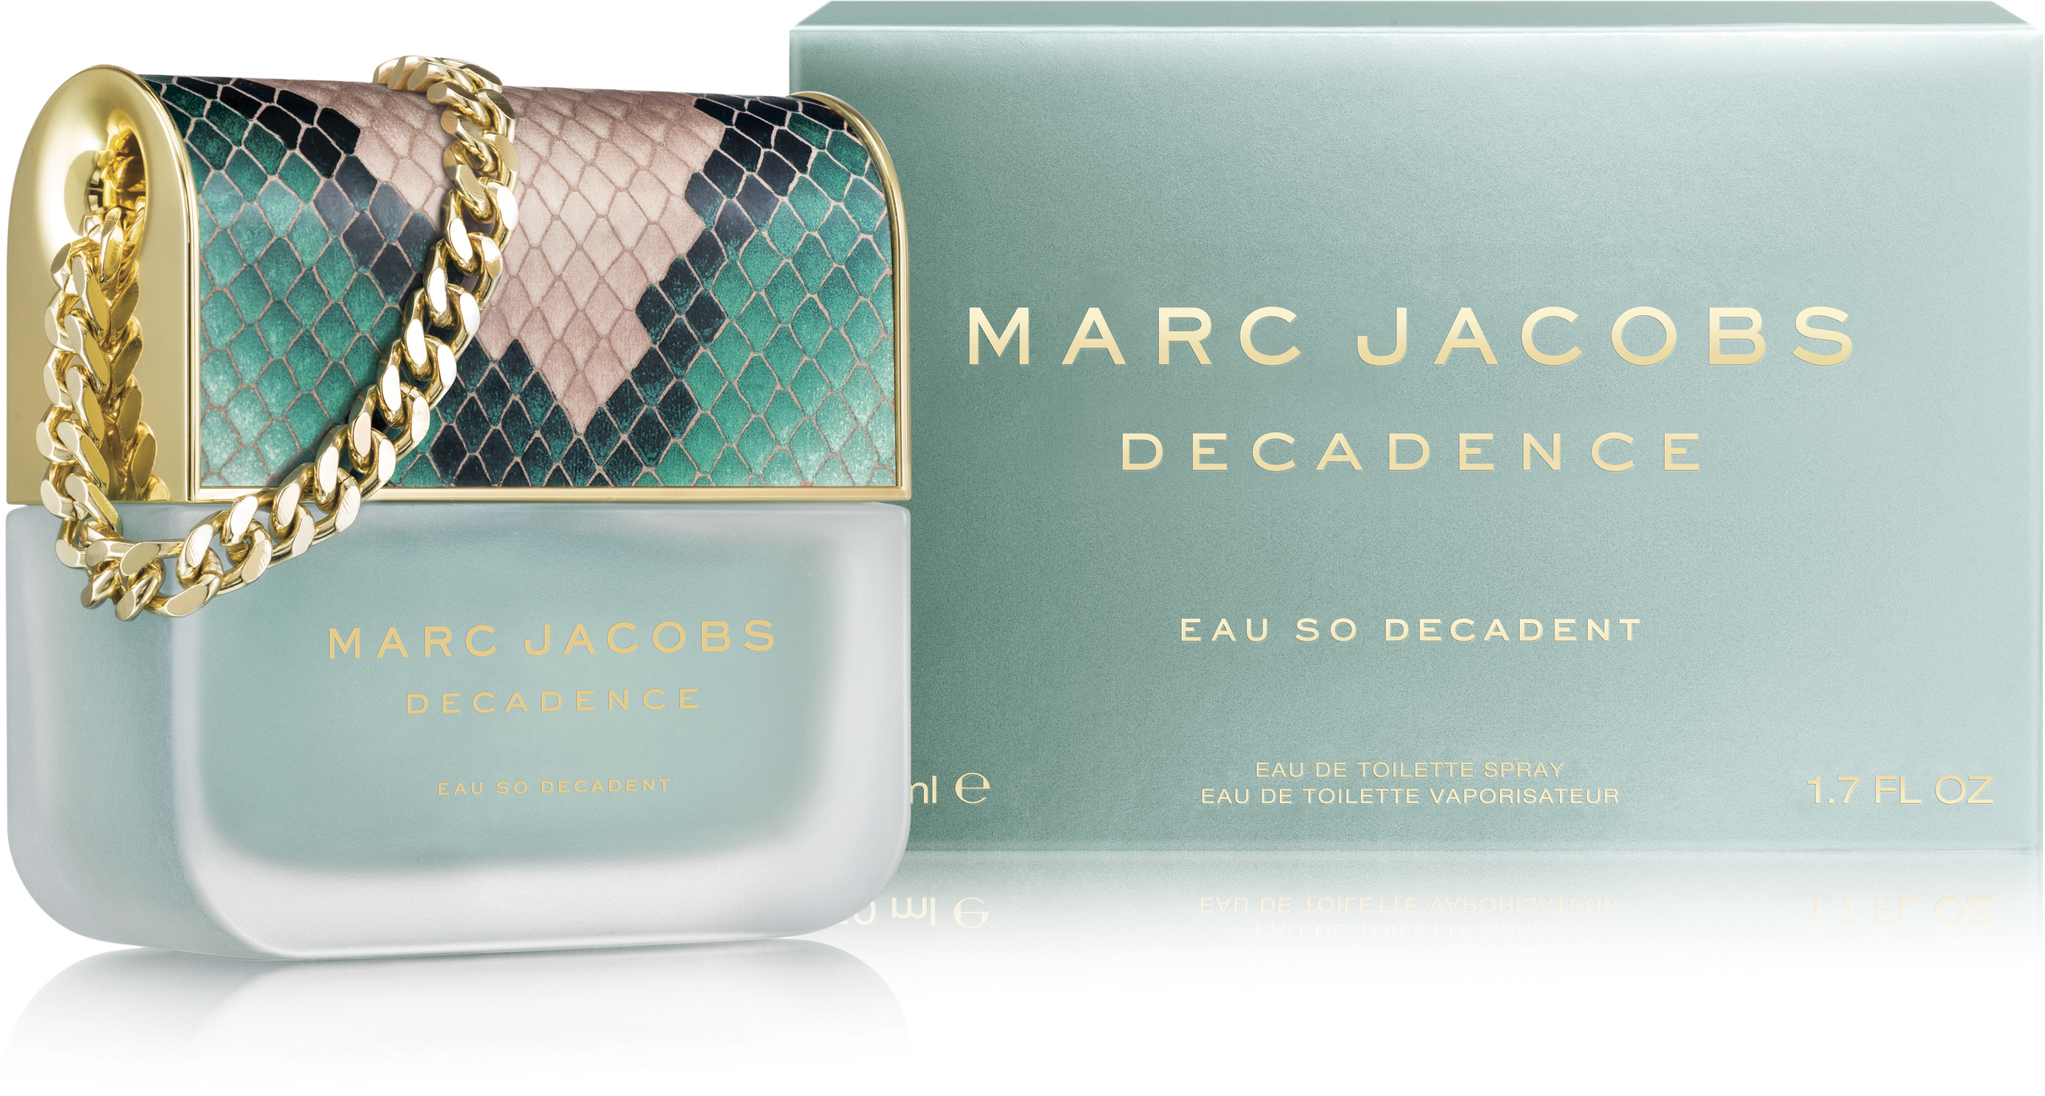 Jacobs Decadence Eau so Decadent EdT 50ml in duty-free at airport